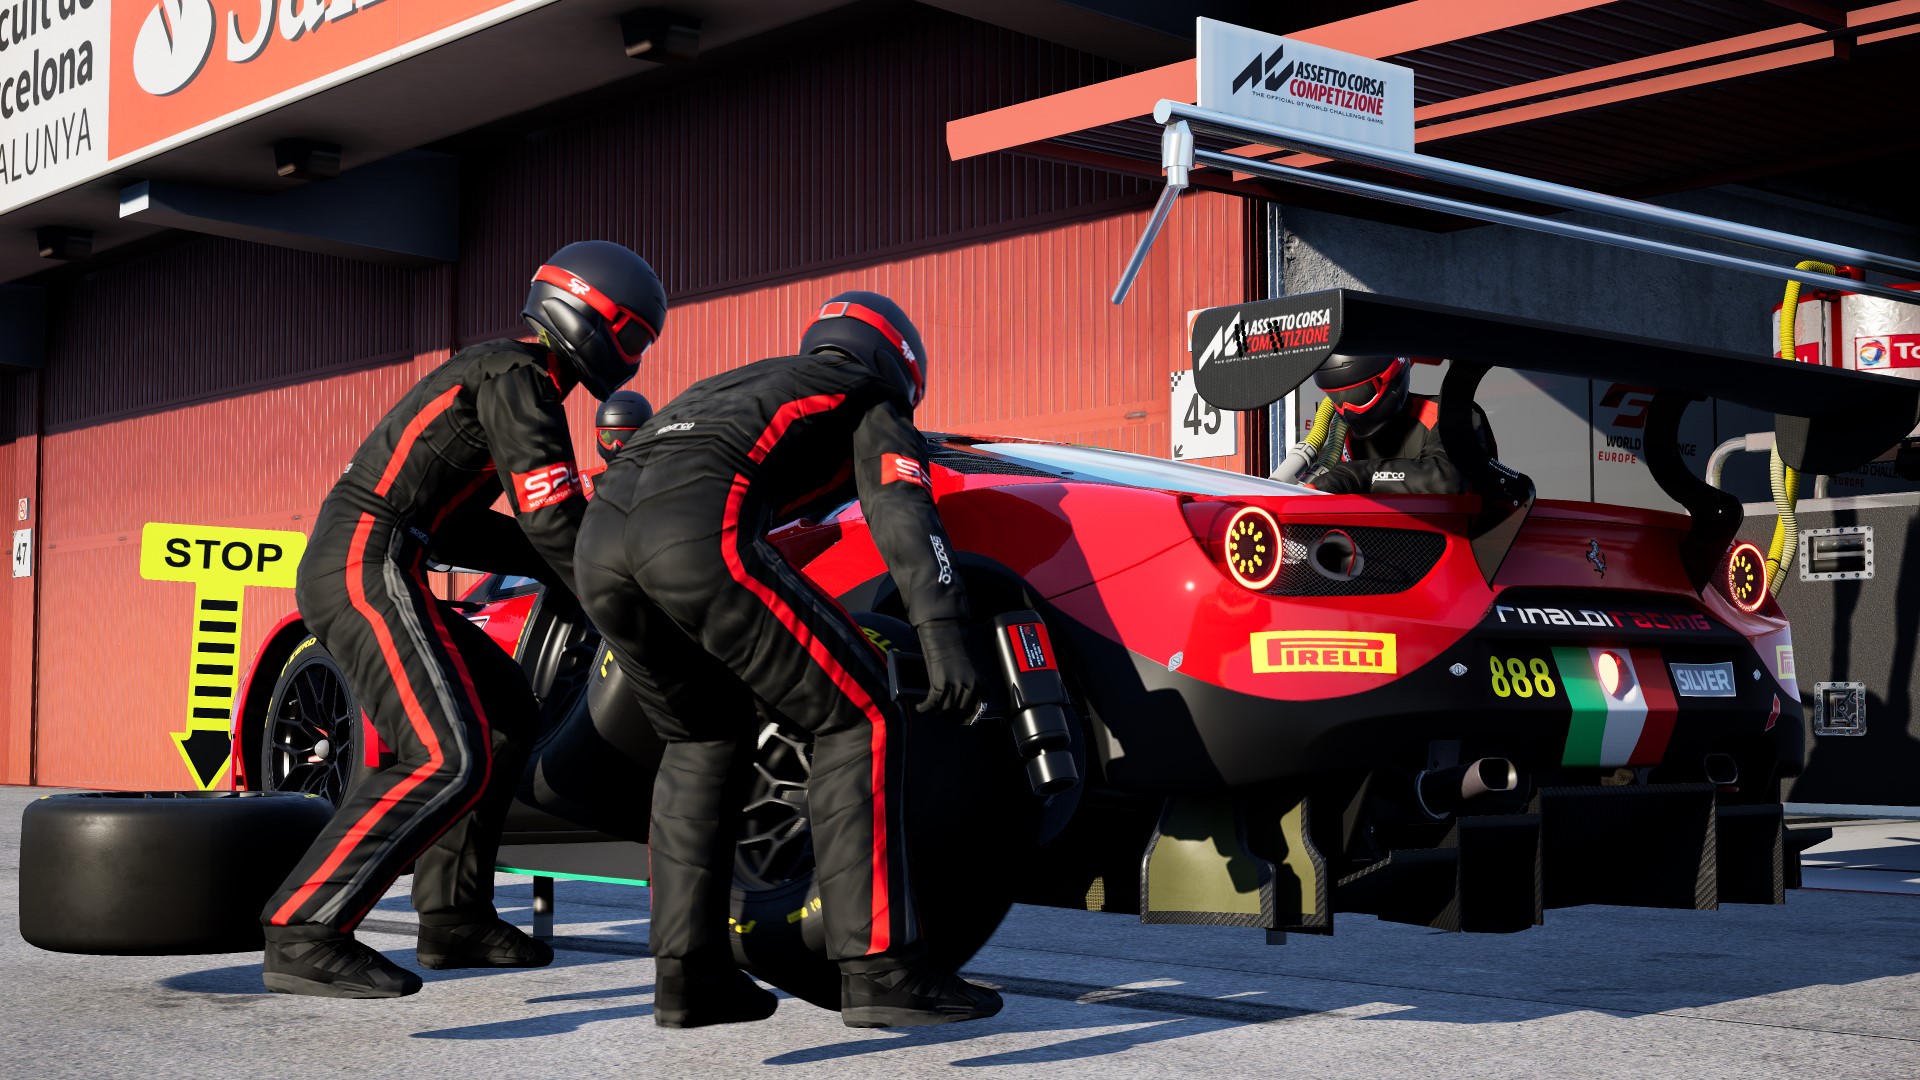 Assetto Corsa Tips and Tricks